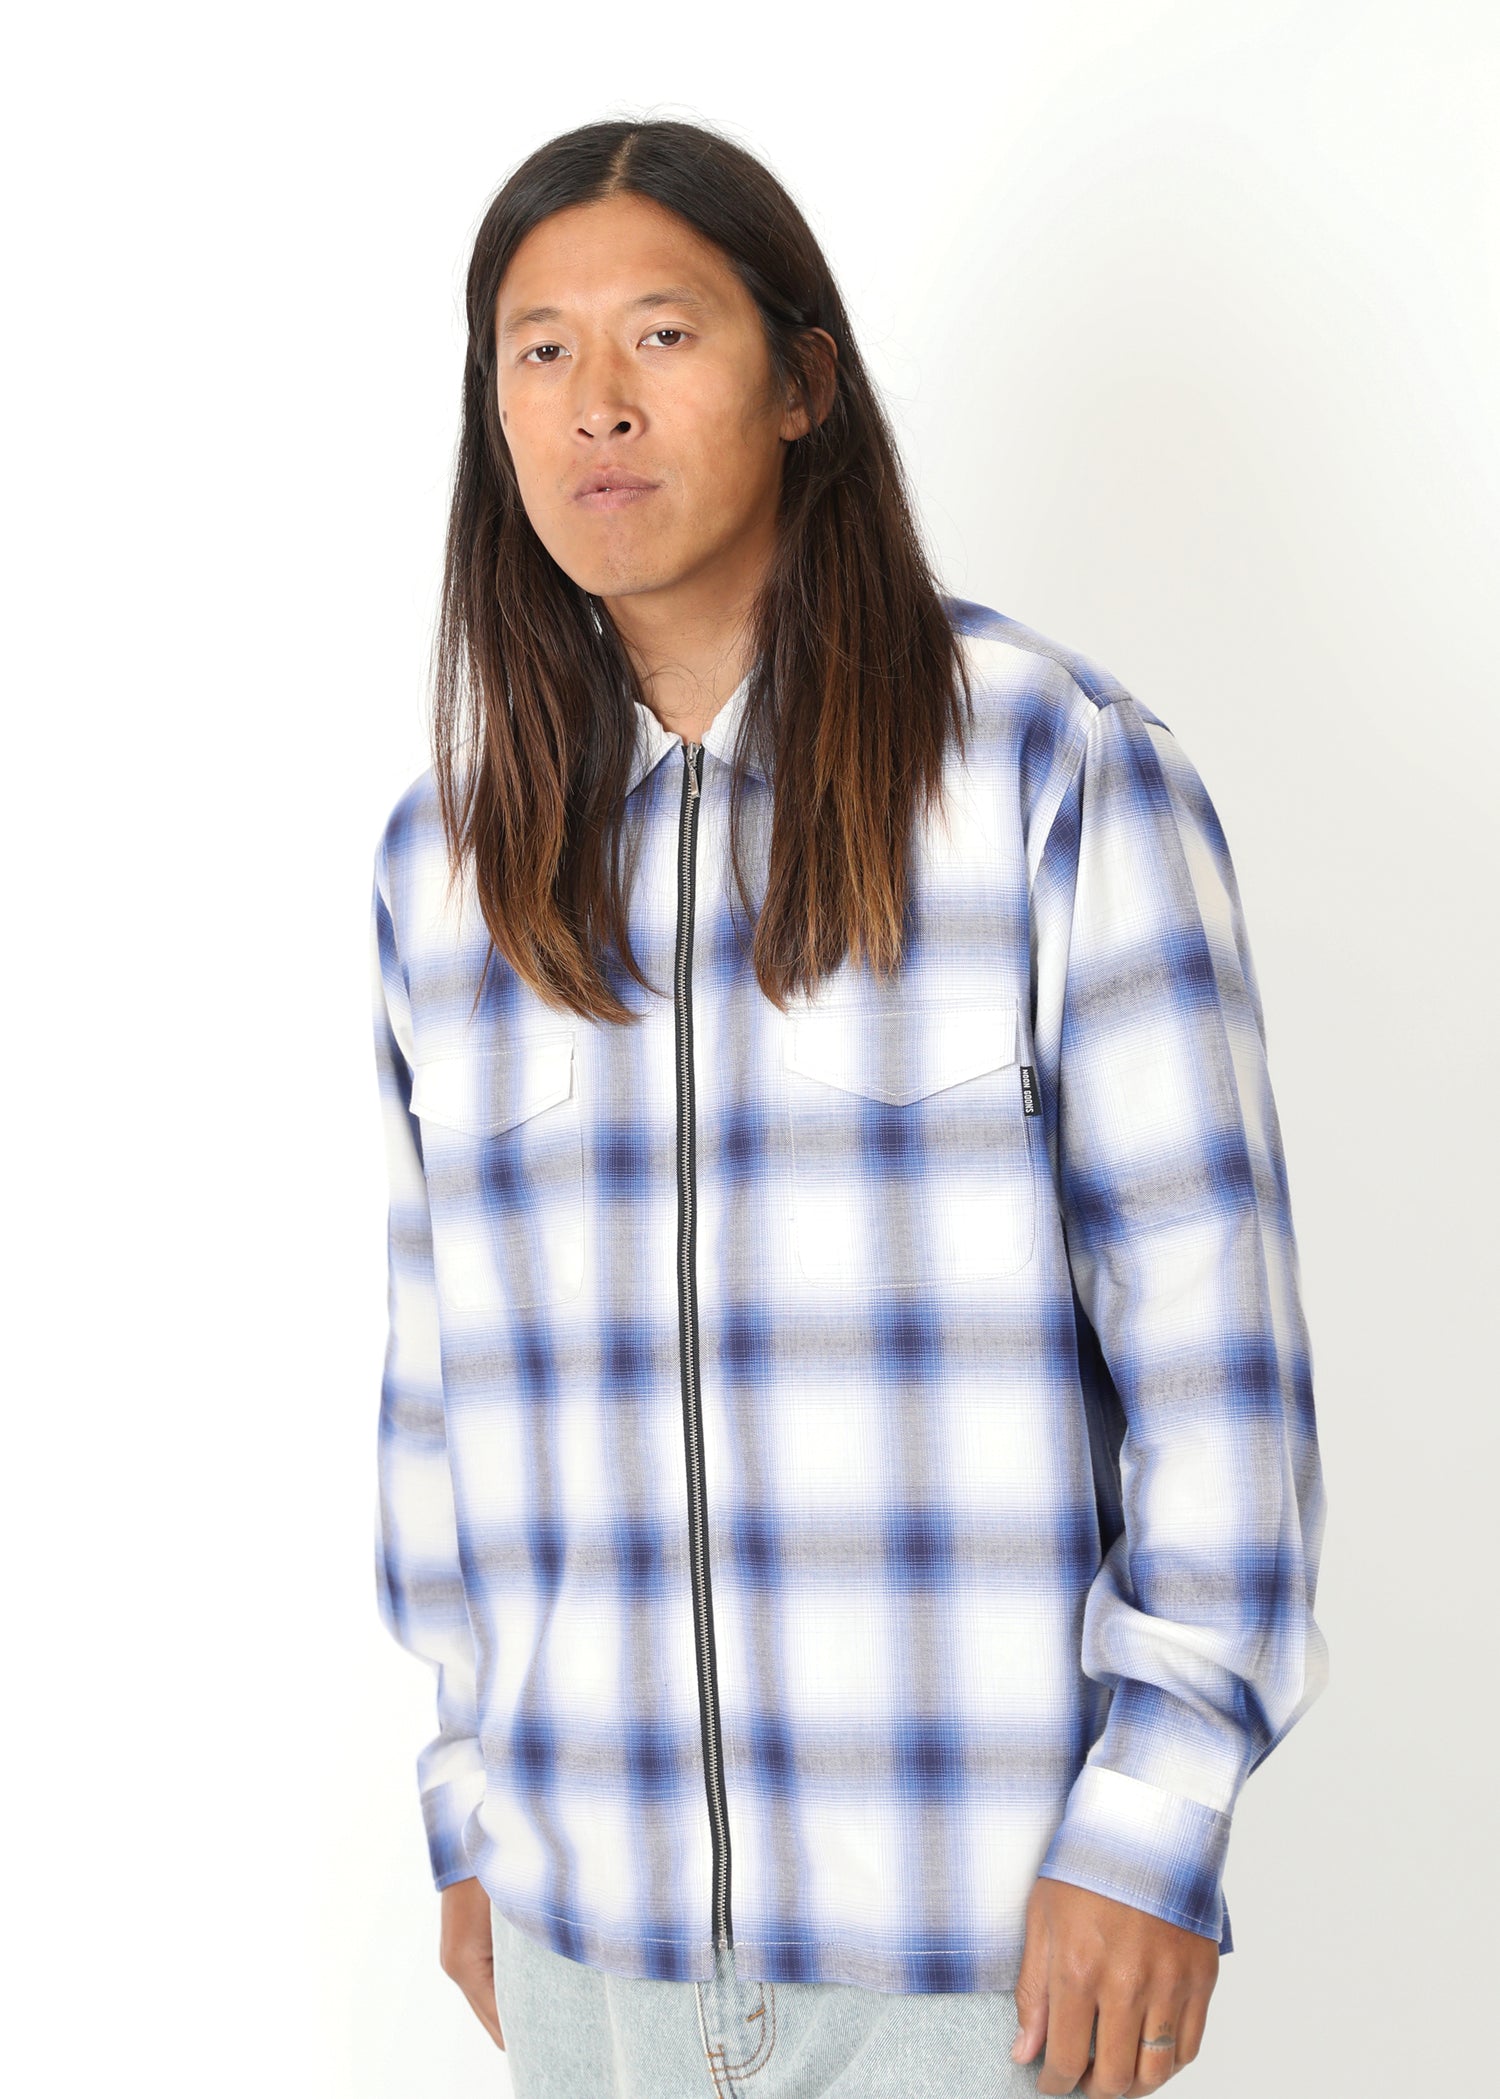 Something In The Way Of Zip Shirt - Blue/White